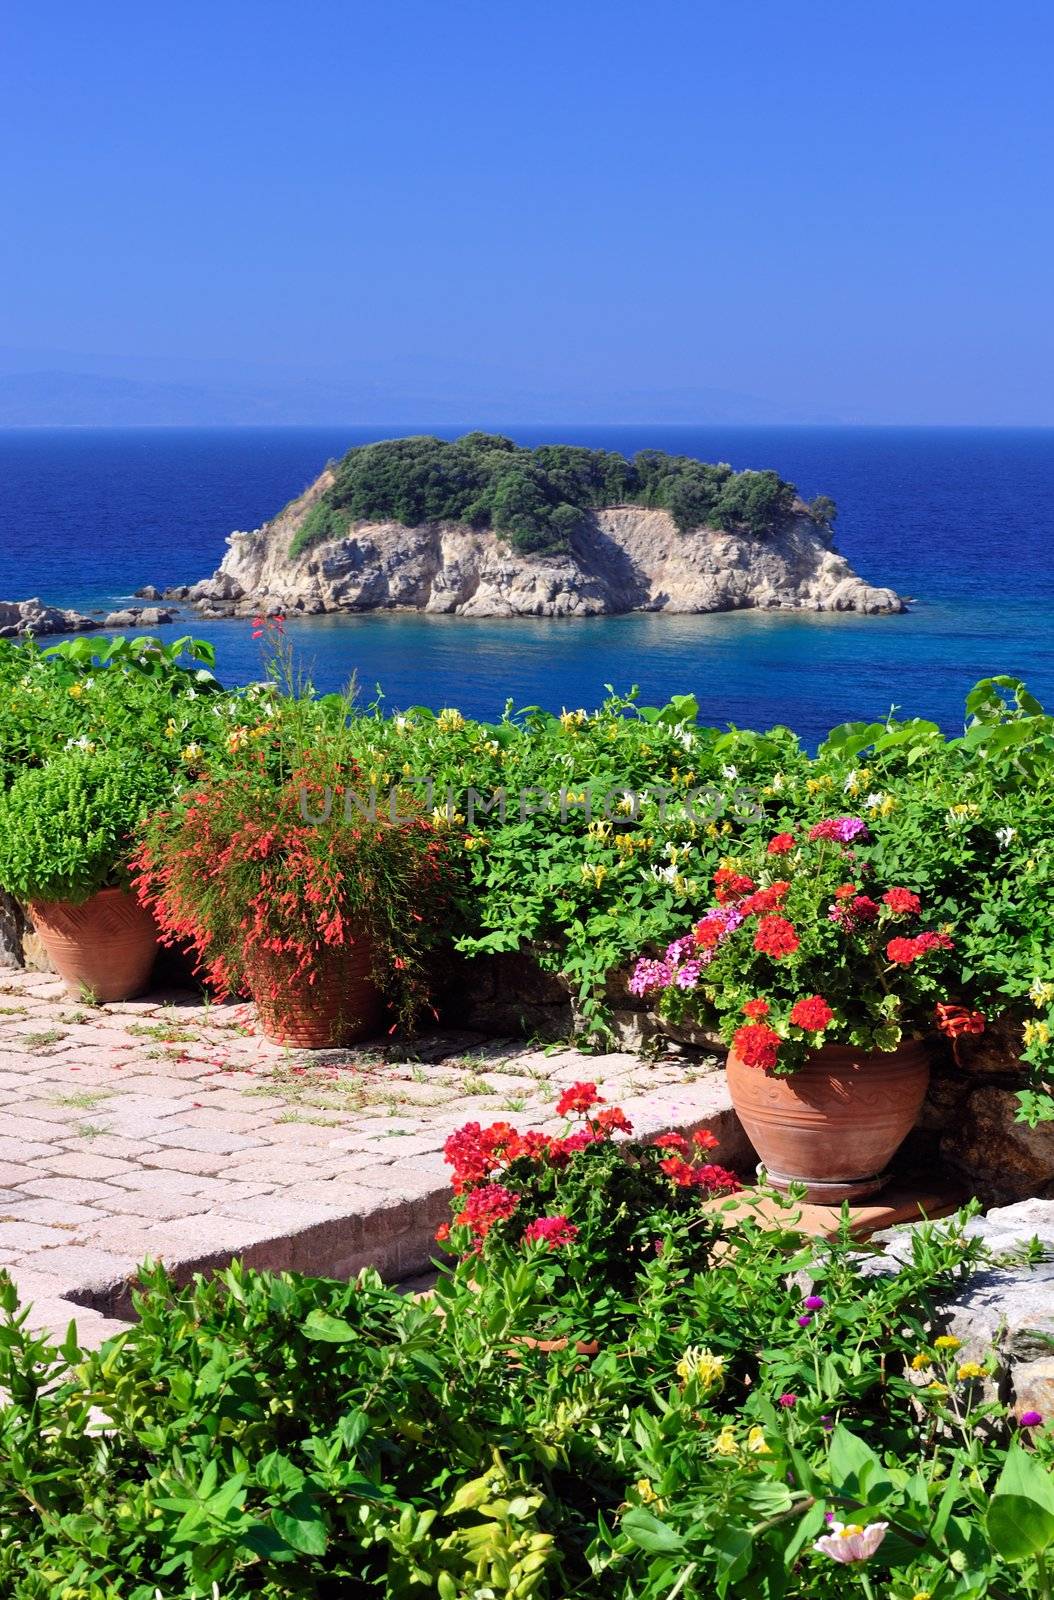 Detail of a garden veranda with a spectacular view overlooking a small island in the Aegean Sea